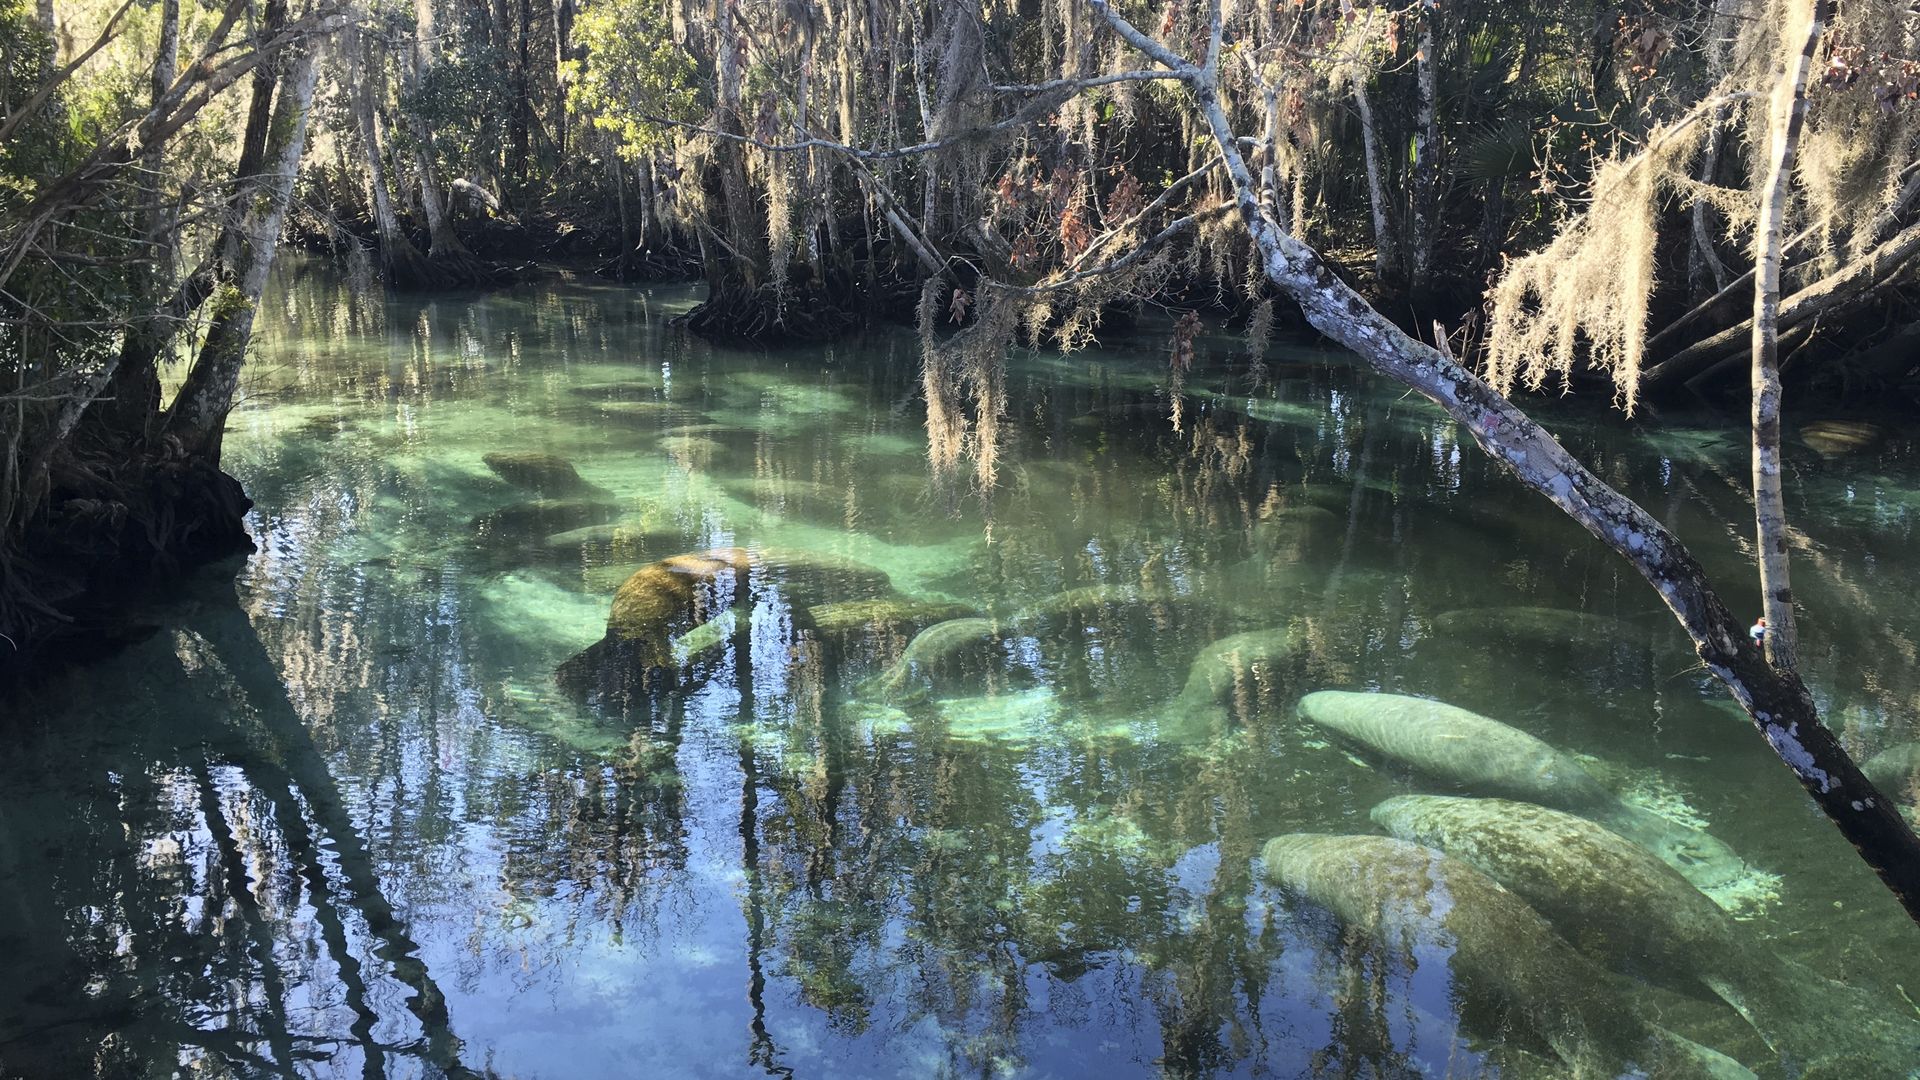 In a Thursday, Feb. 11, 2016 file photo, manatees crowd into 72-degree springs, seeking warmth from cold Gulf temperatures, at Three Sisters Springs in Crystal River Fla.